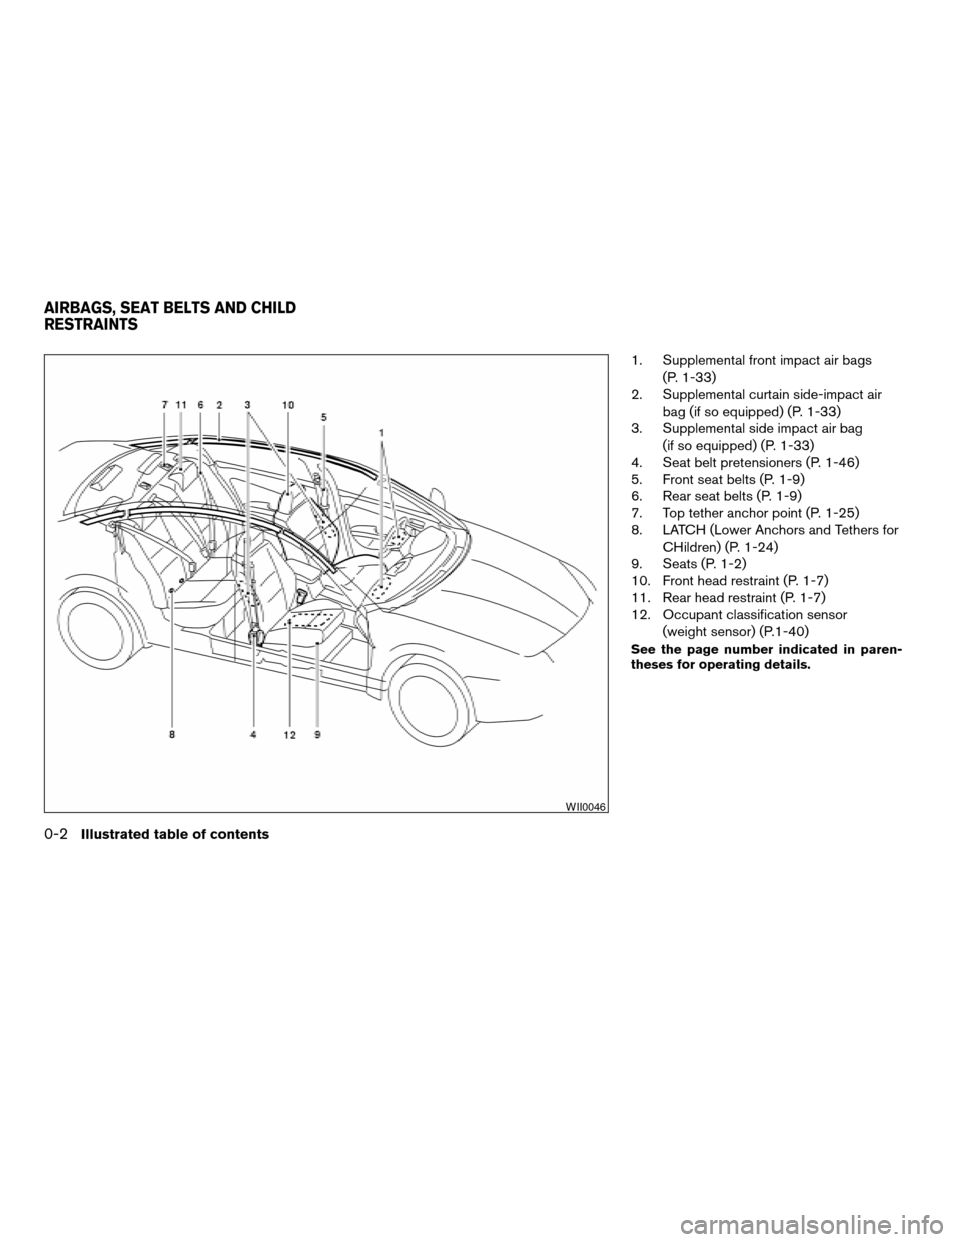 NISSAN ALTIMA 2005 L31 / 3.G Owners Manual 1. Supplemental front impact air bags(P. 1-33)
2. Supplemental curtain side-impact air
bag (if so equipped) (P. 1-33)
3. Supplemental side impact air bag
(if so equipped) (P. 1-33)
4. Seat belt preten